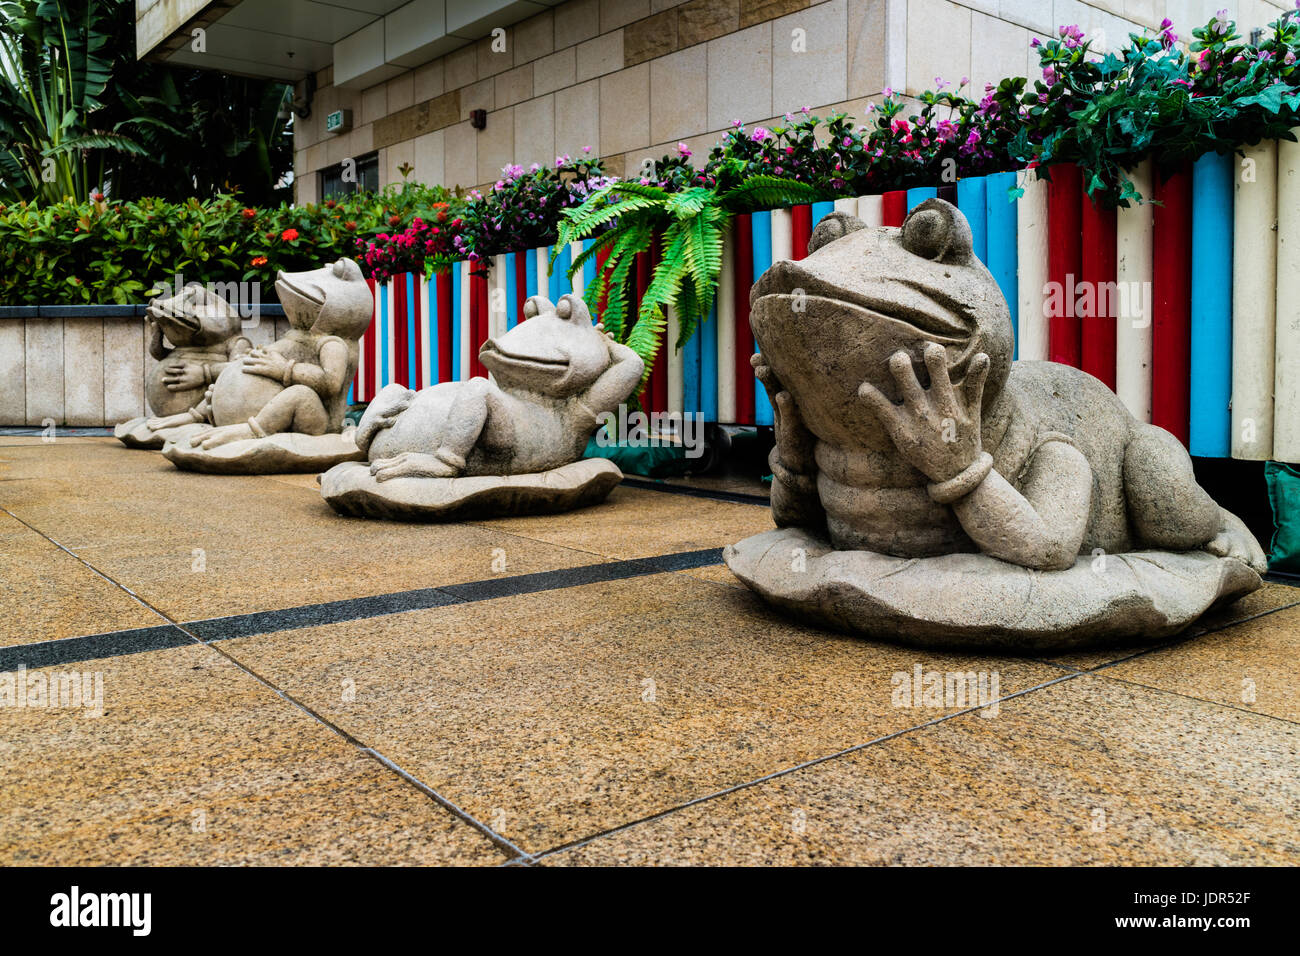 Statues of frogs in various poses Stock Photo